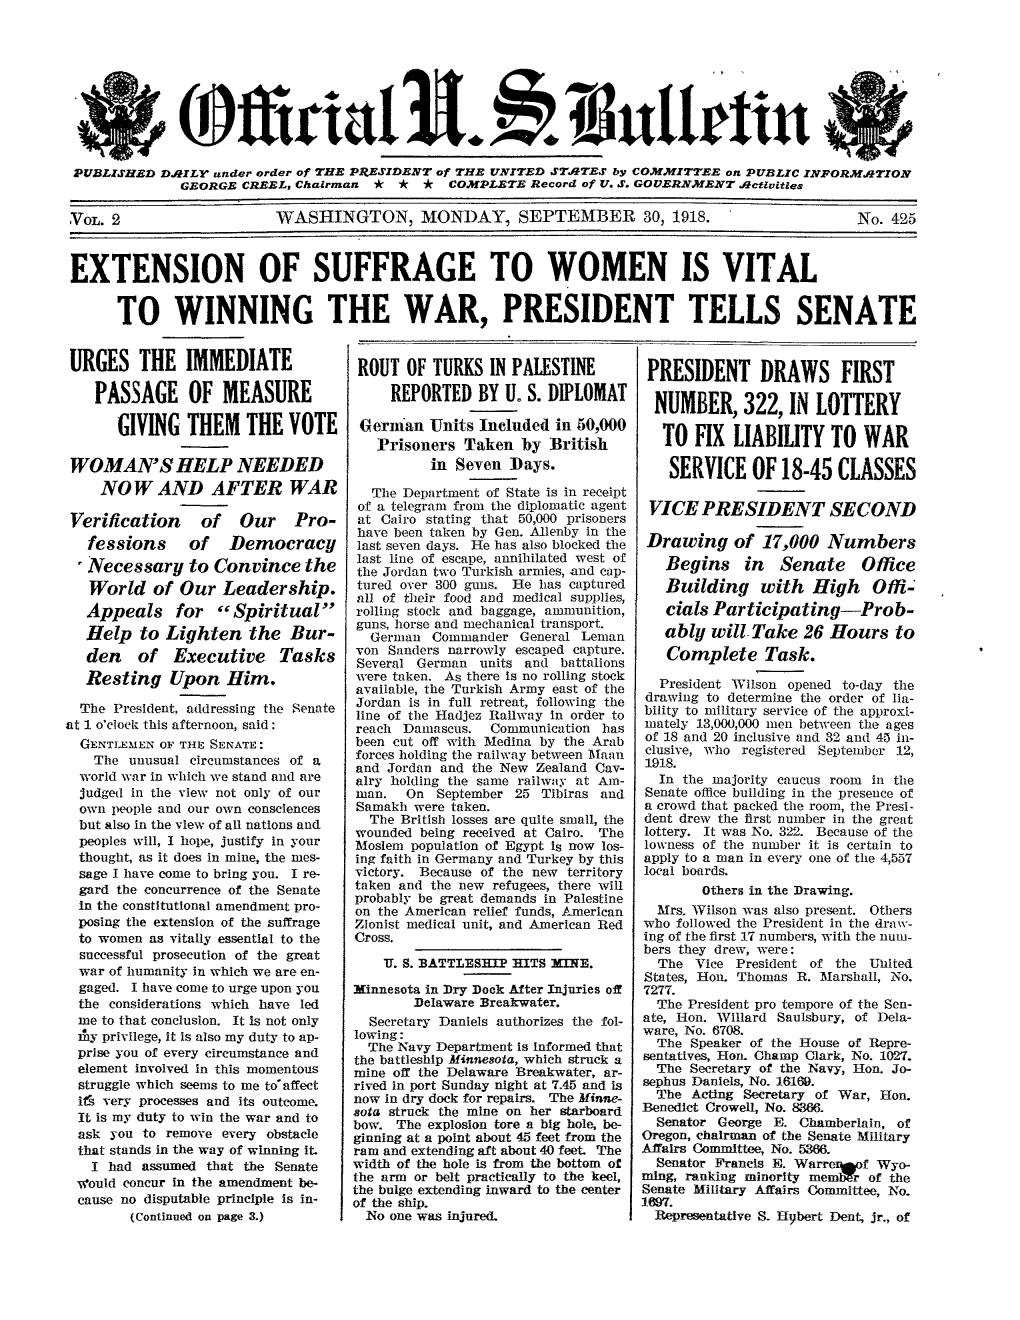 Extension of Suffrage to Women Is Vital to Winning